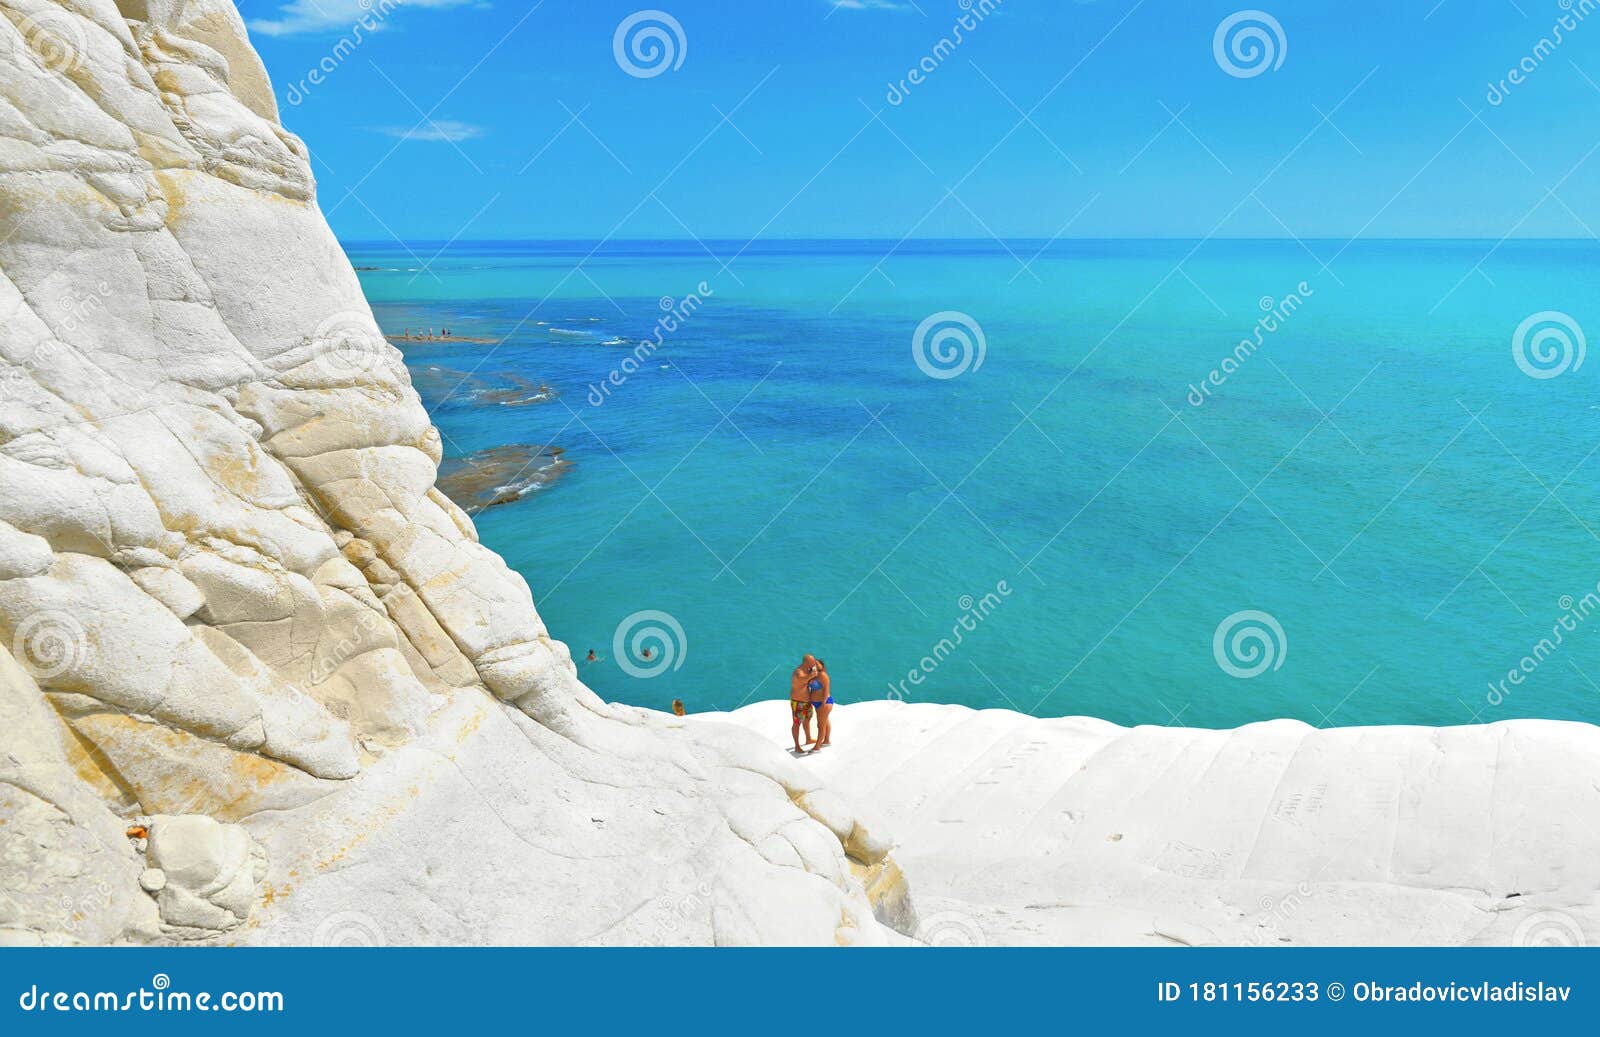 white cliffs naturally made of smooth pug at scala dei turchi beach with group of young people and turquoise mediterra